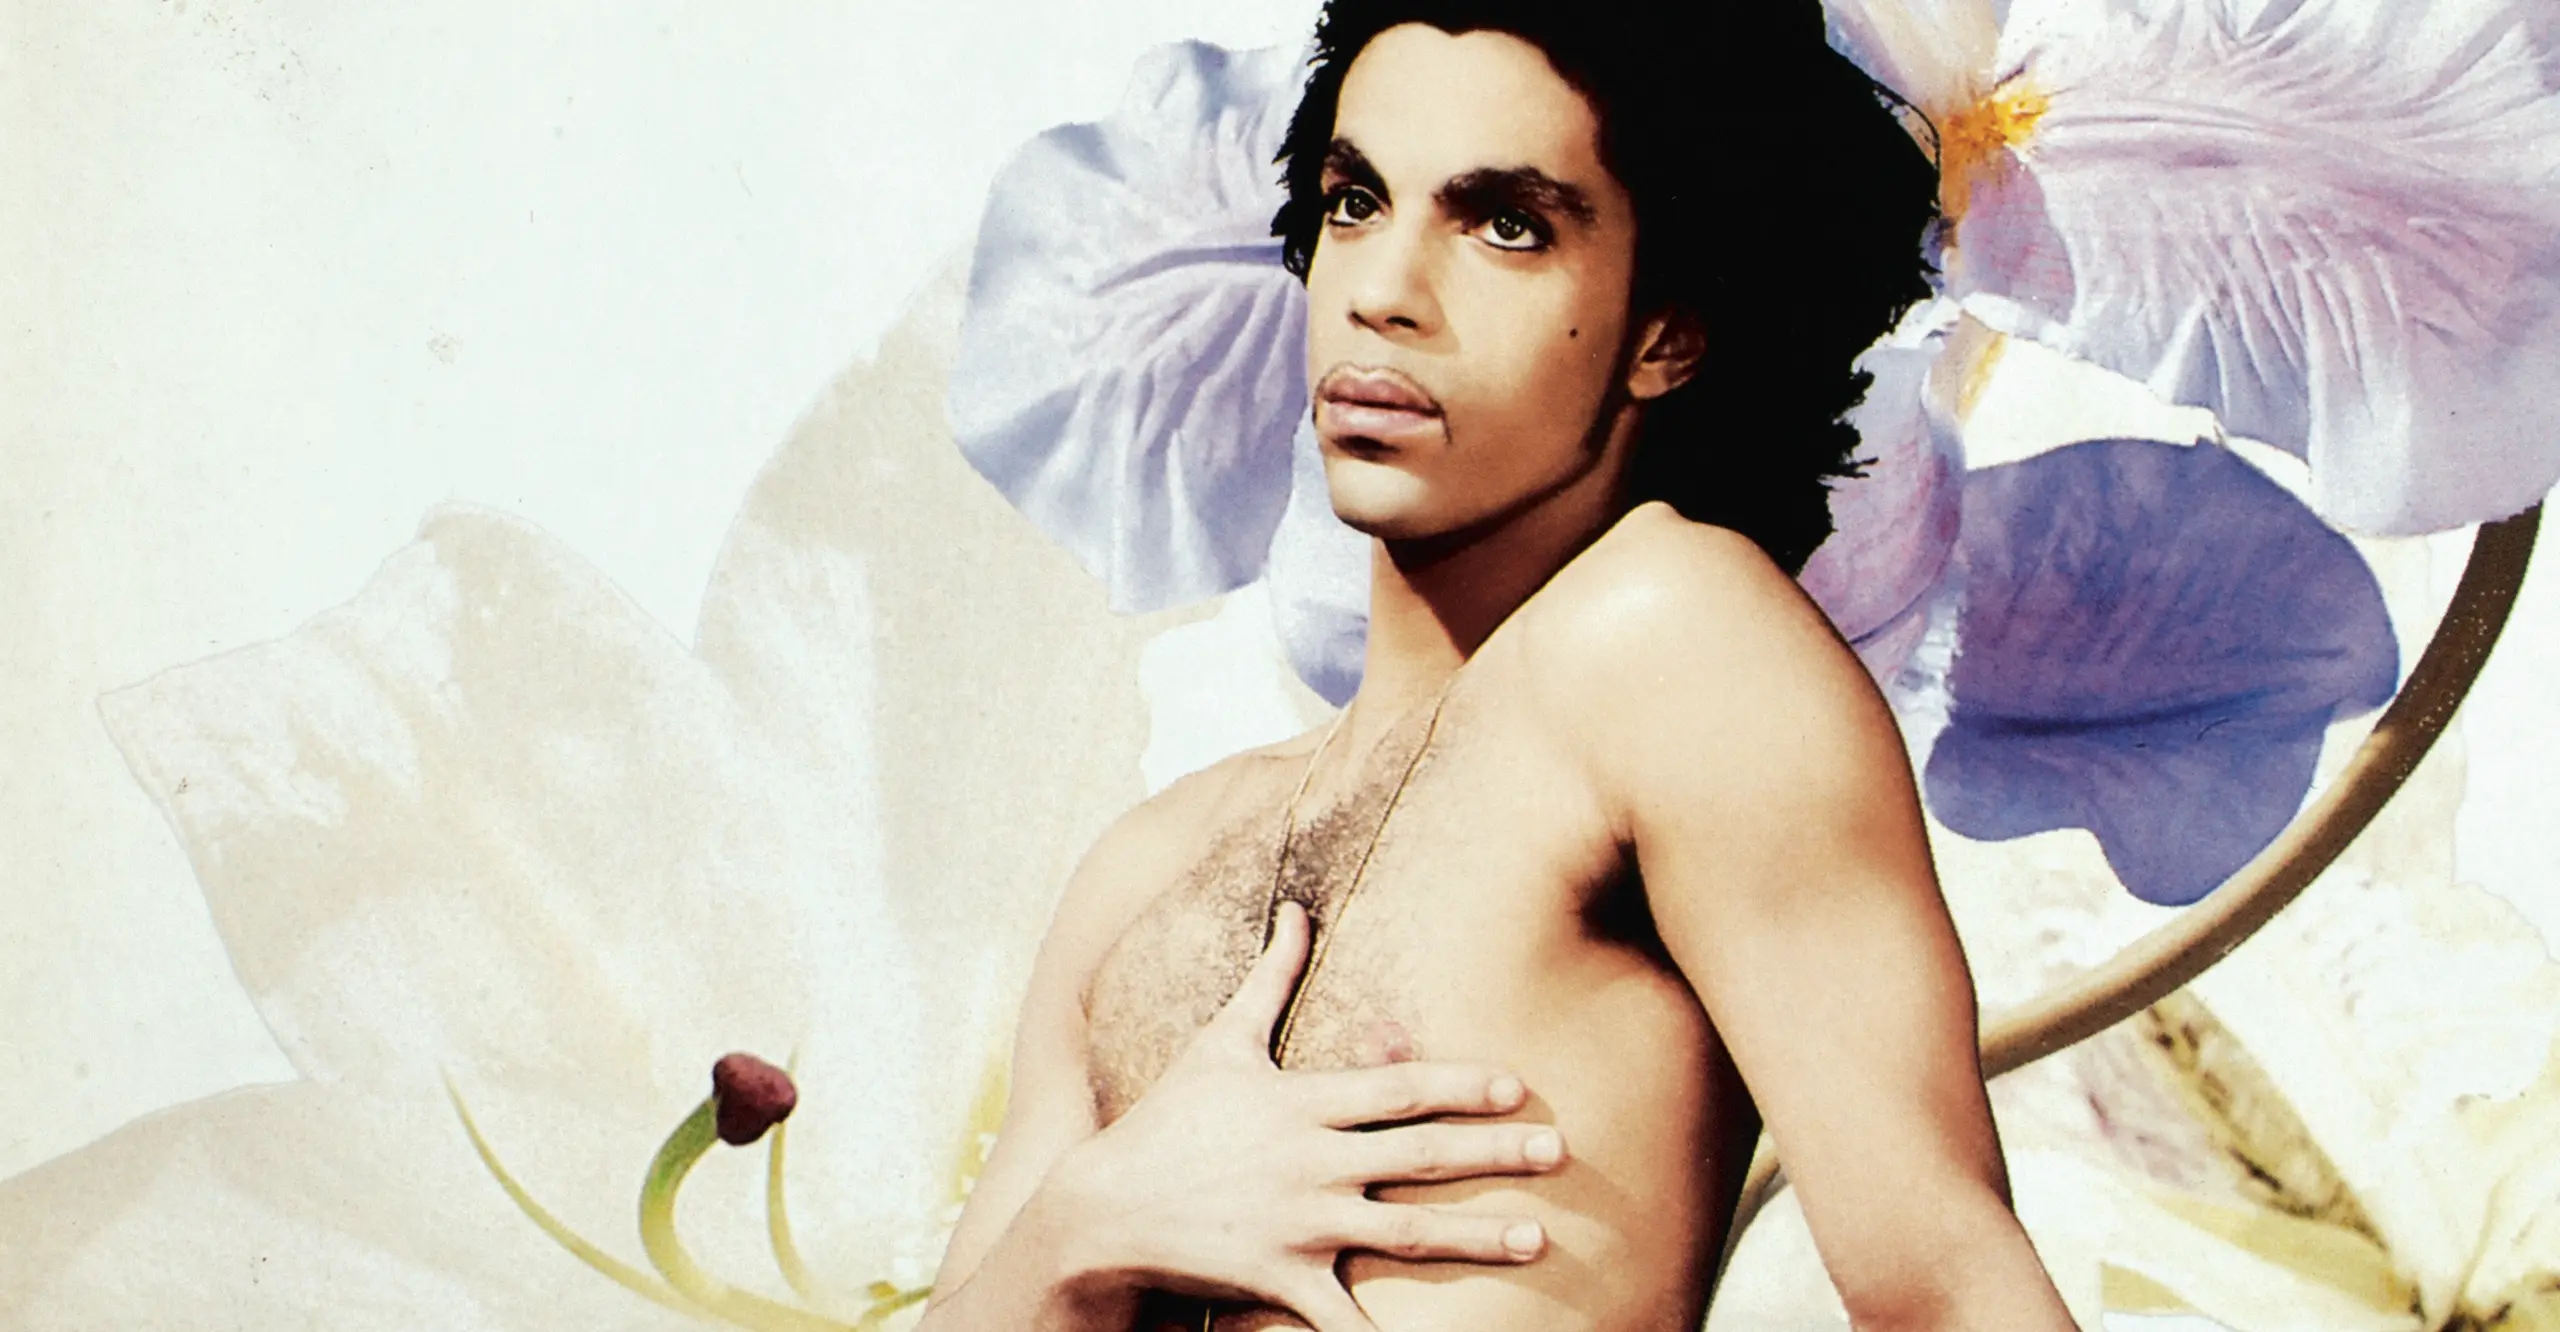 Portrait of the musician Prince looking into the distance with hand held up to naked chest, an enlarged pastel-coloured flower in the background.